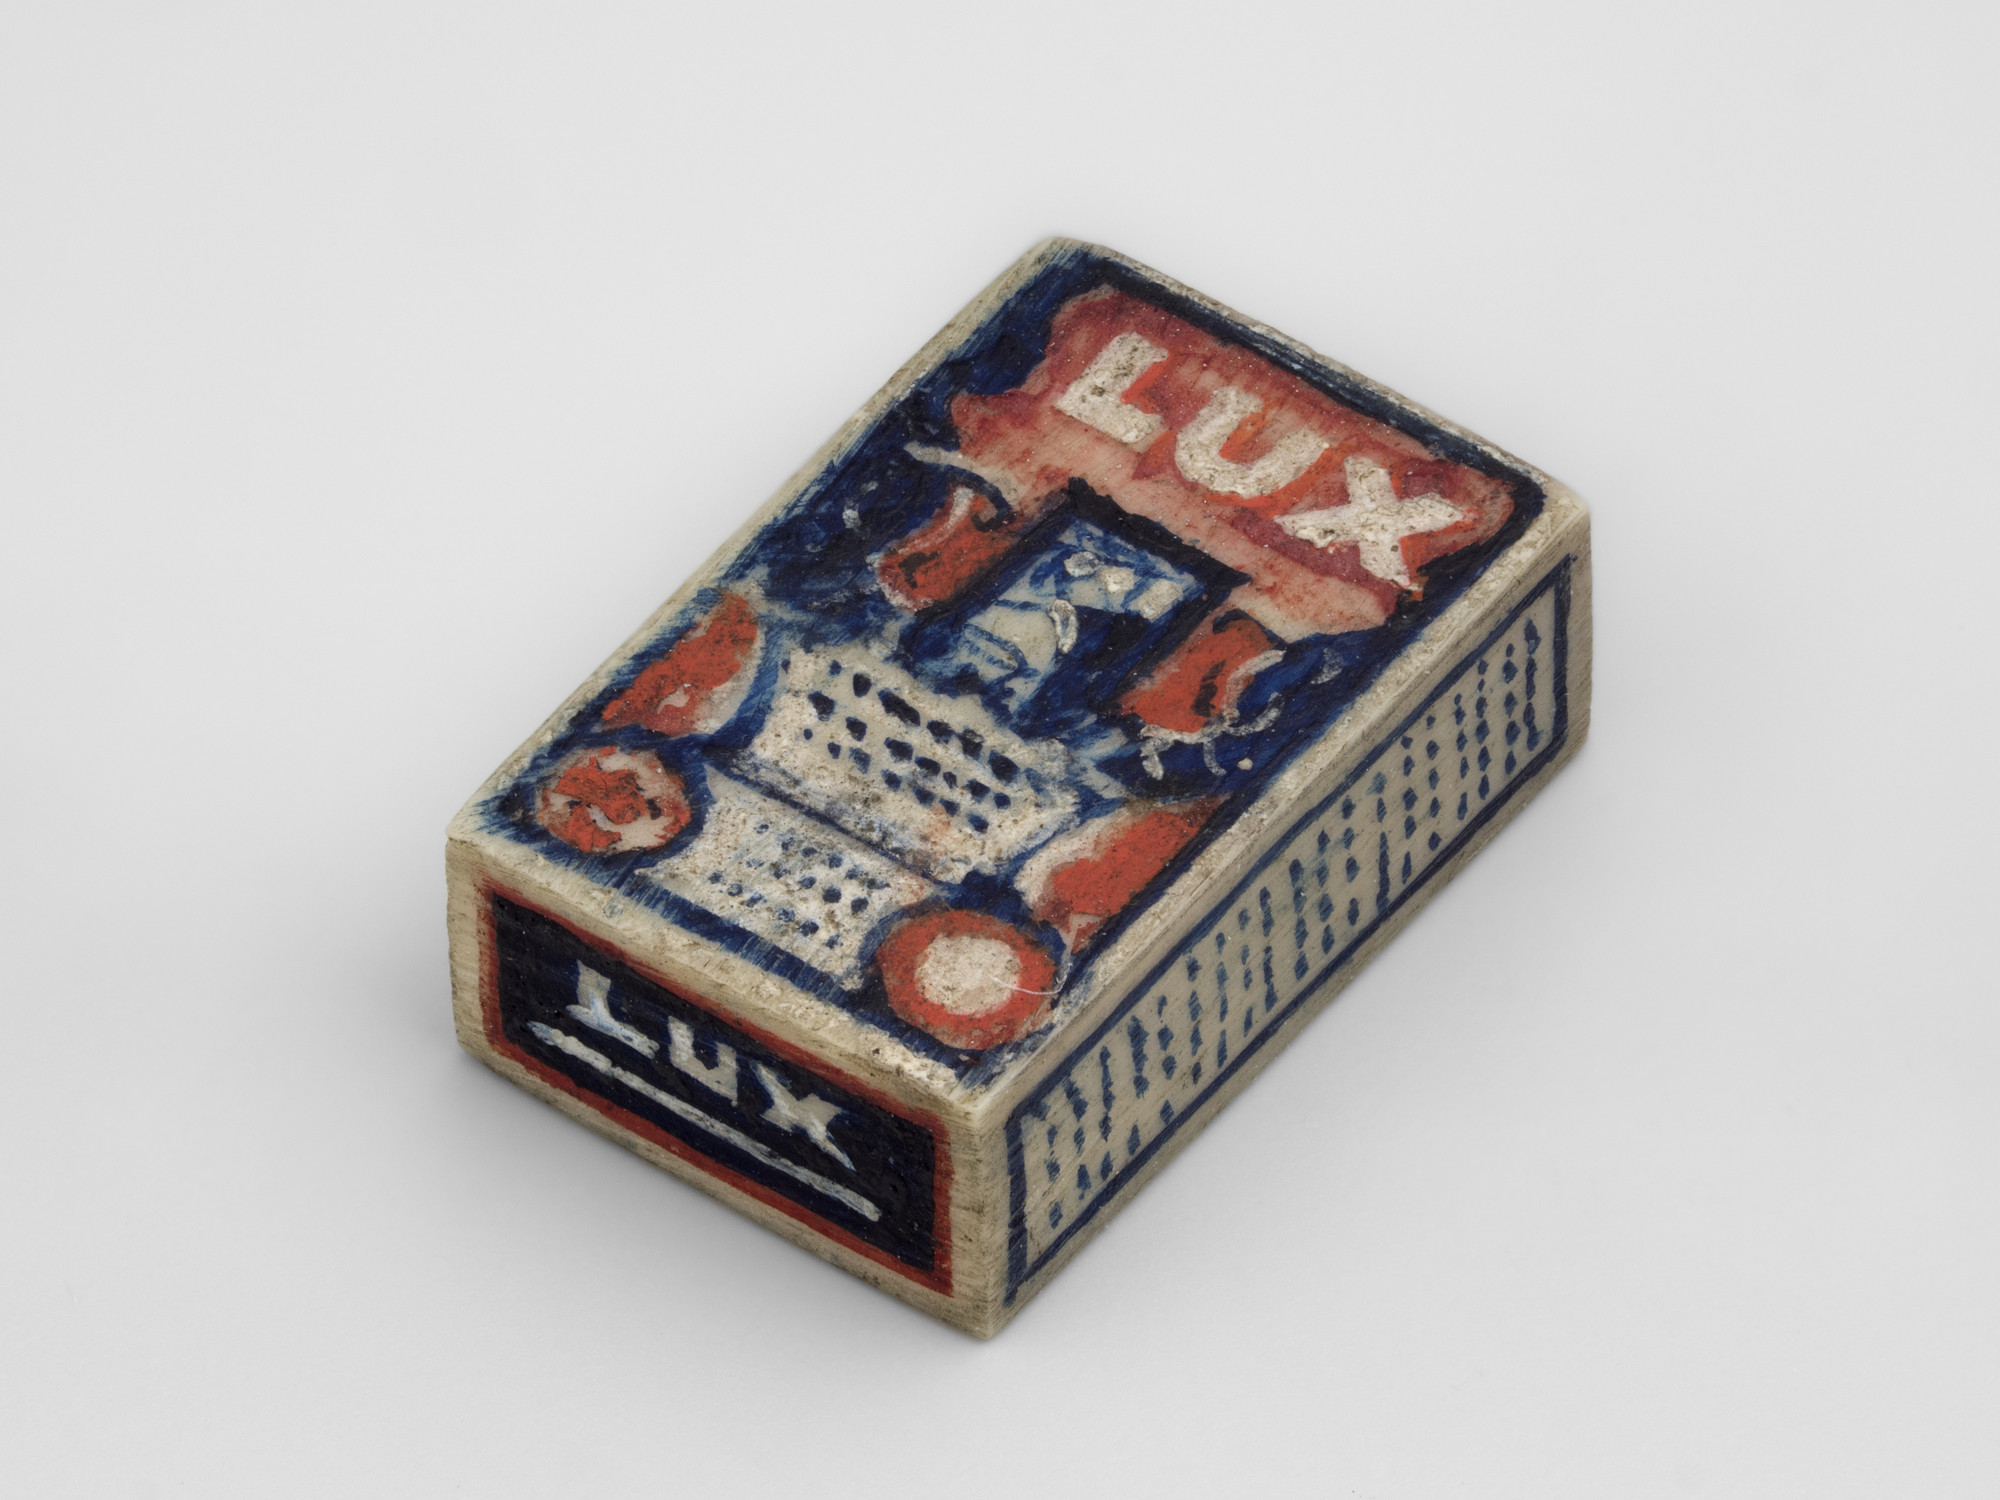 Miniature wooden box painted as if with labels of Lux soap flakes